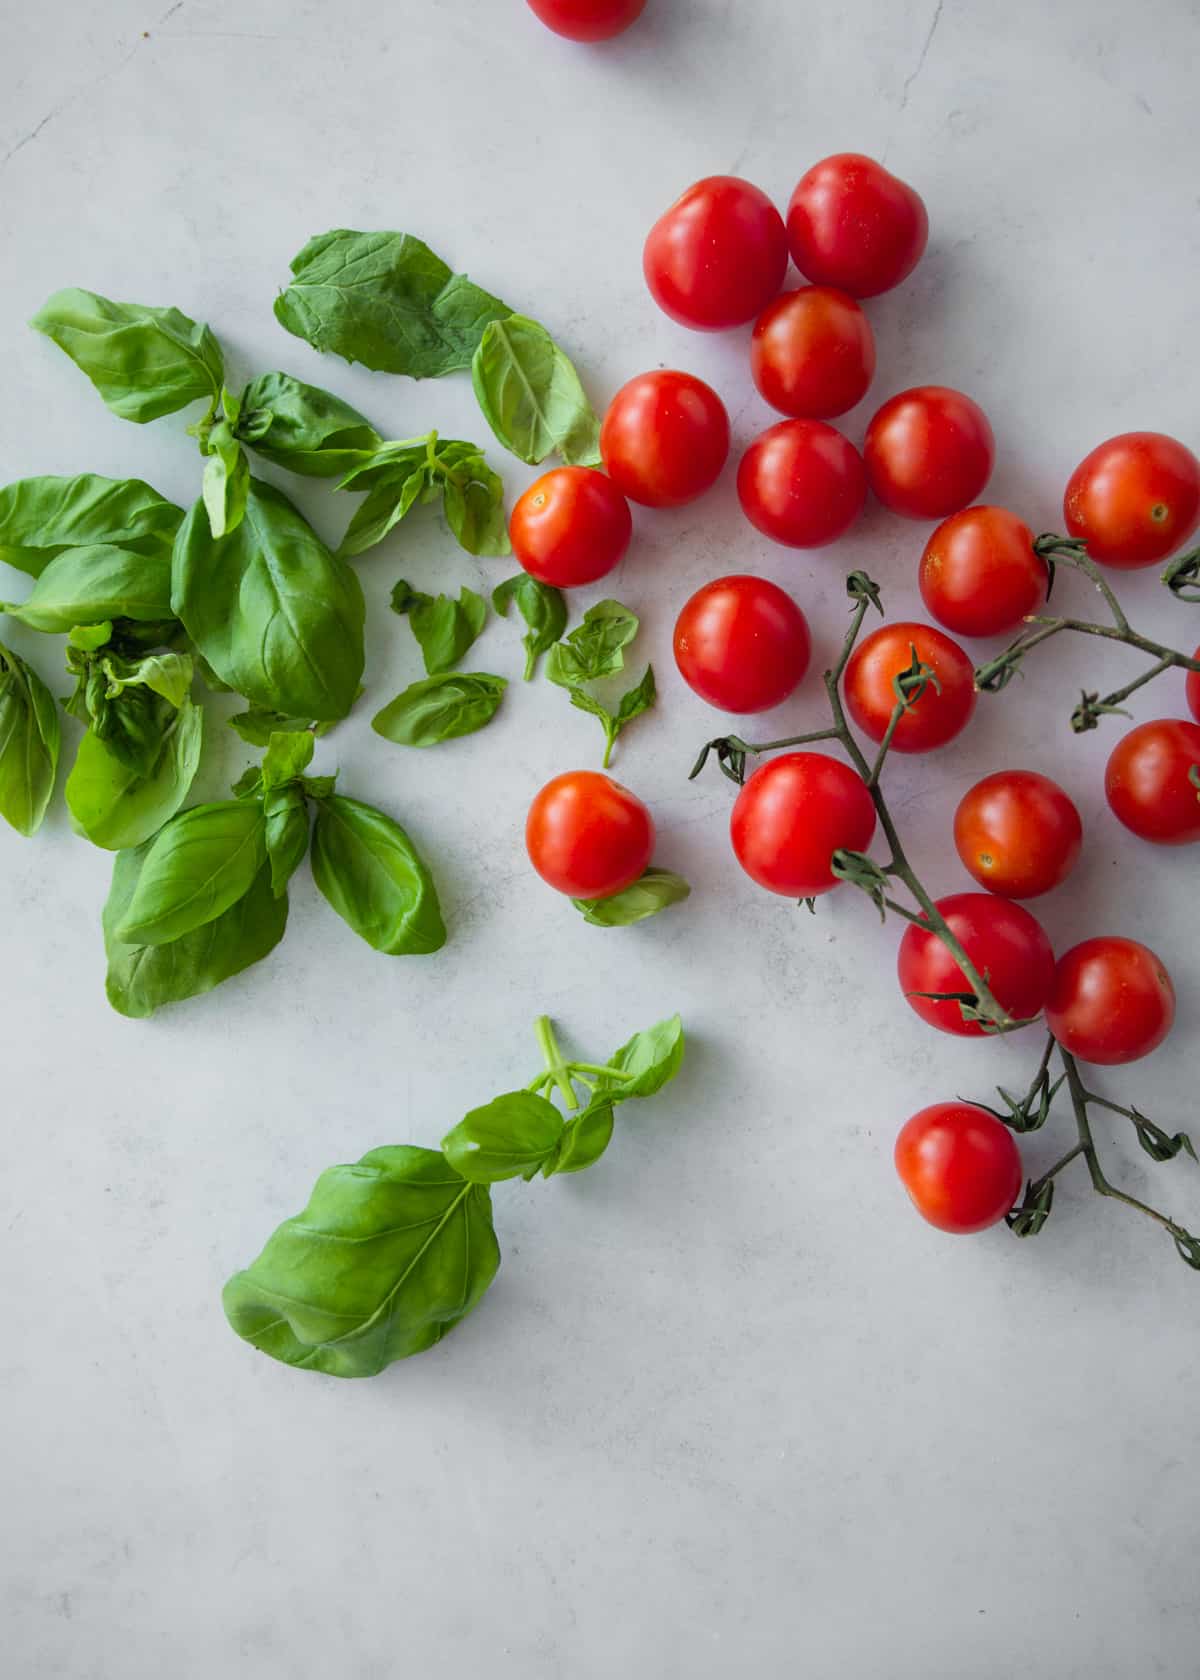 basil and cherry tomatoes on a grey countertop